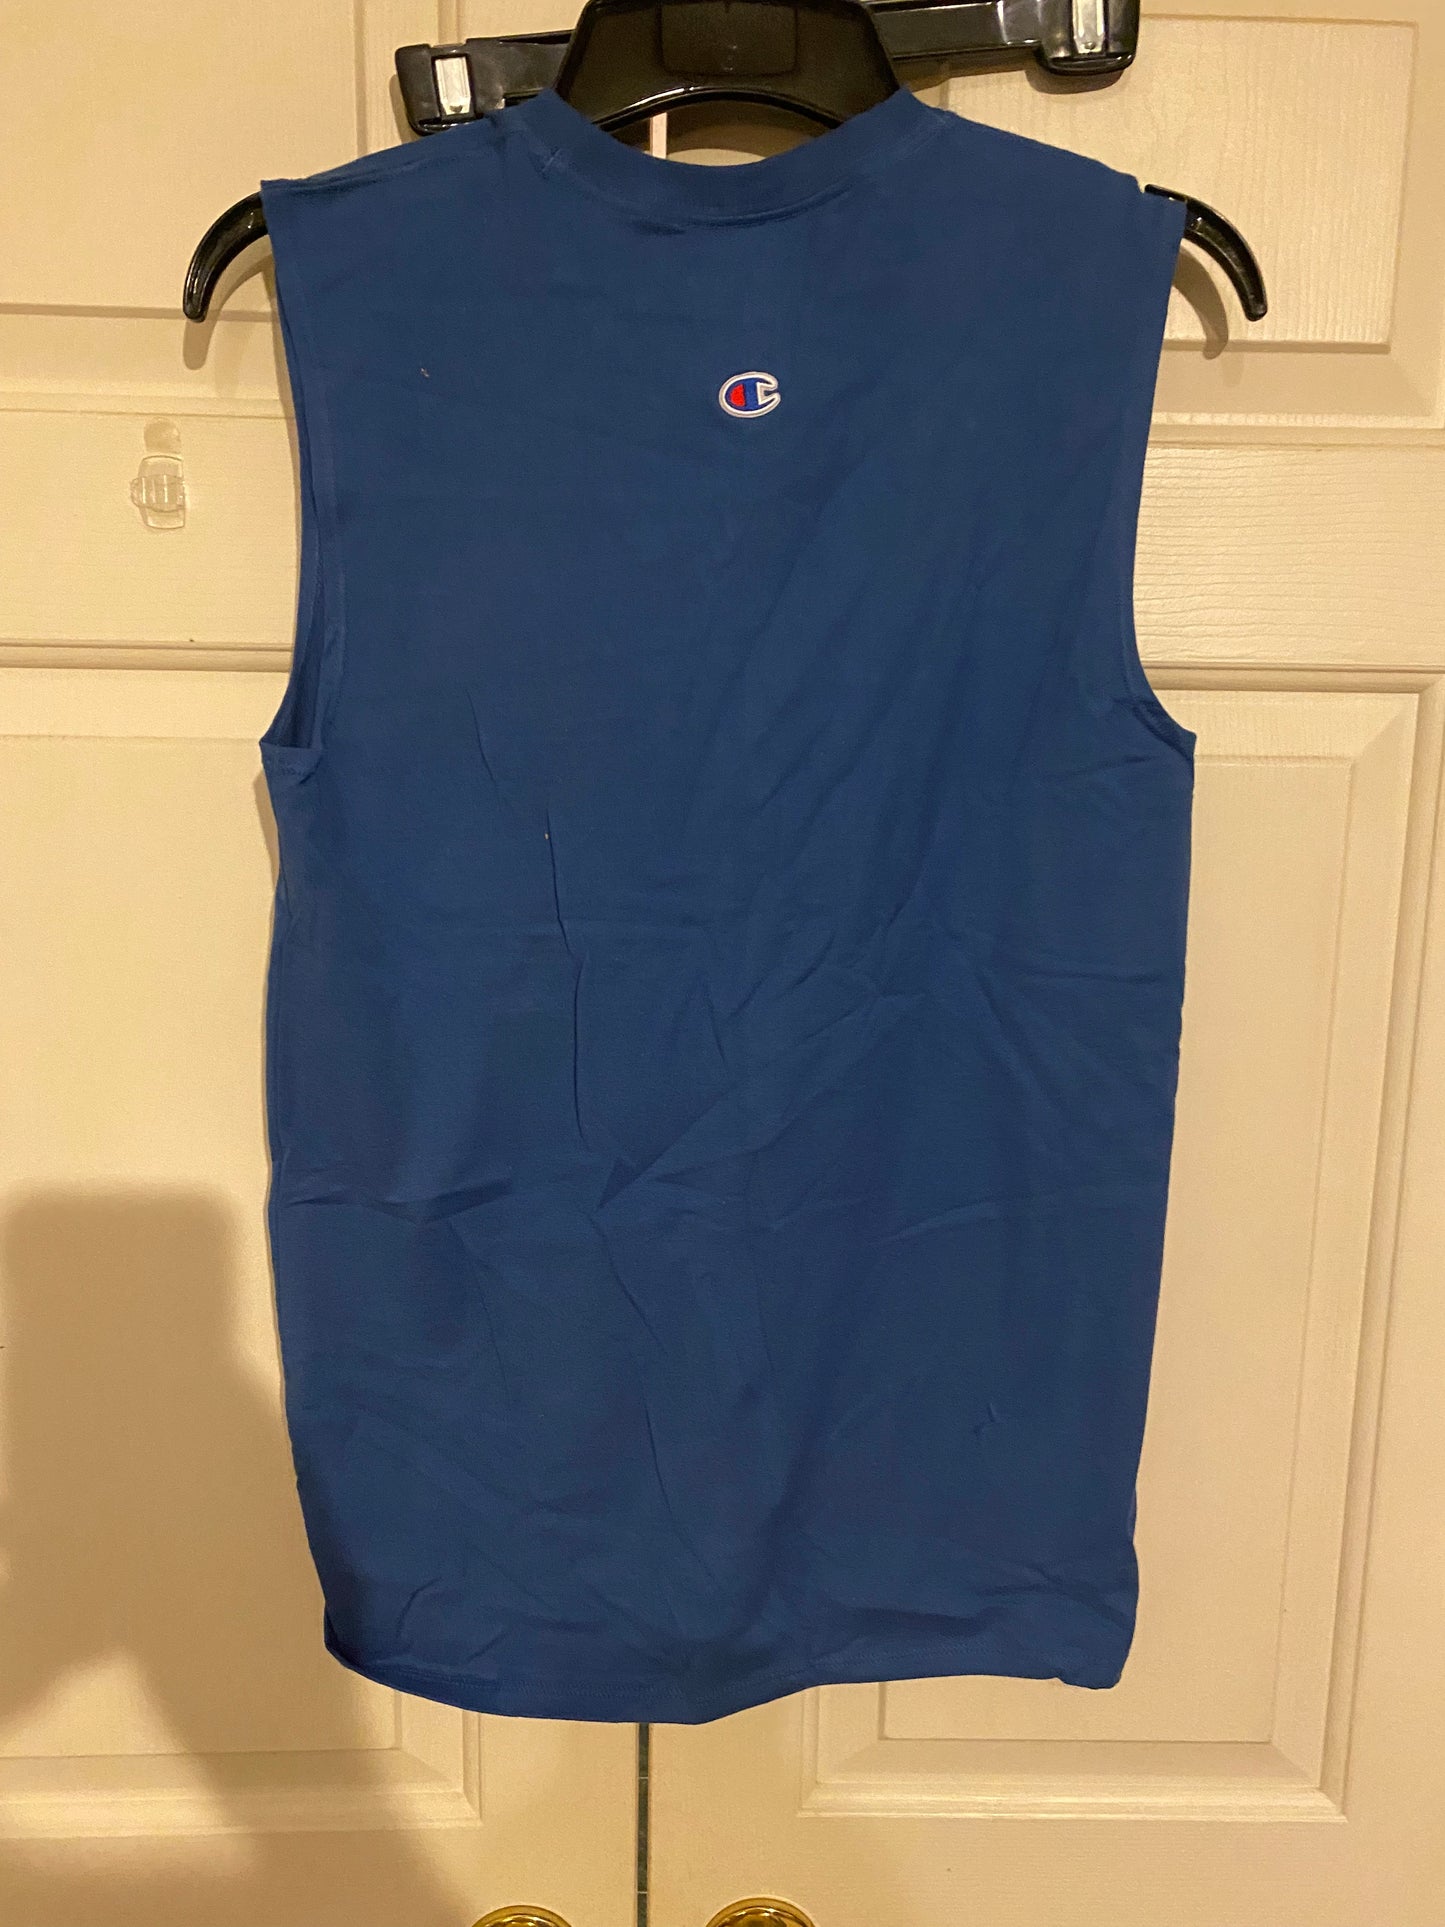 Men's CHAMPION LOGO GRAPHIC Blue Sleeveless MUSCLE Tee T Shirt Size Small